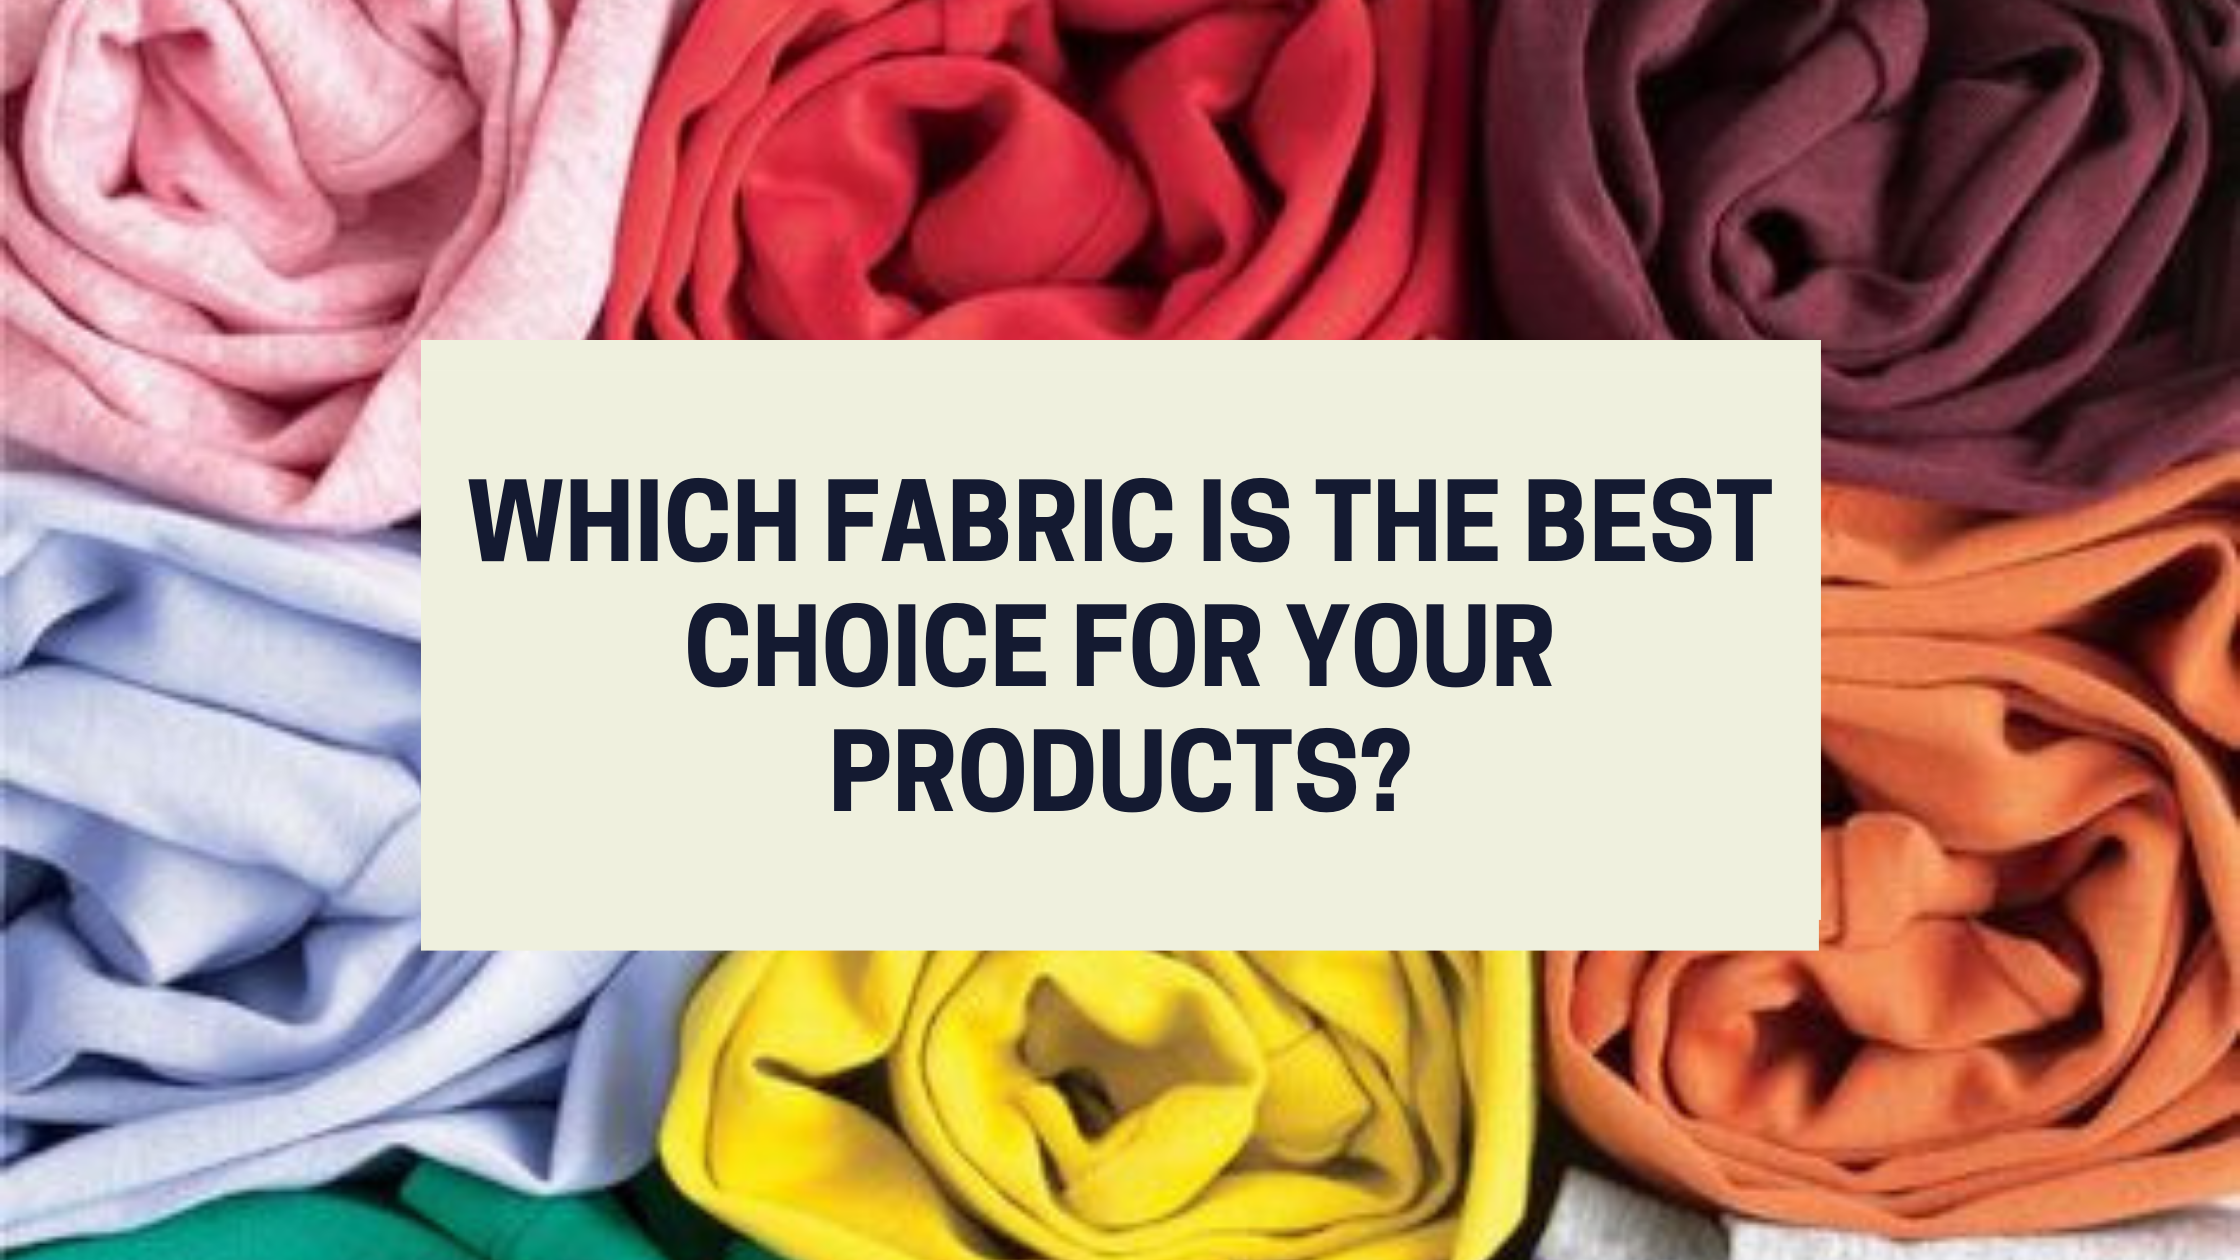 Which fabric is the best choice for your products?